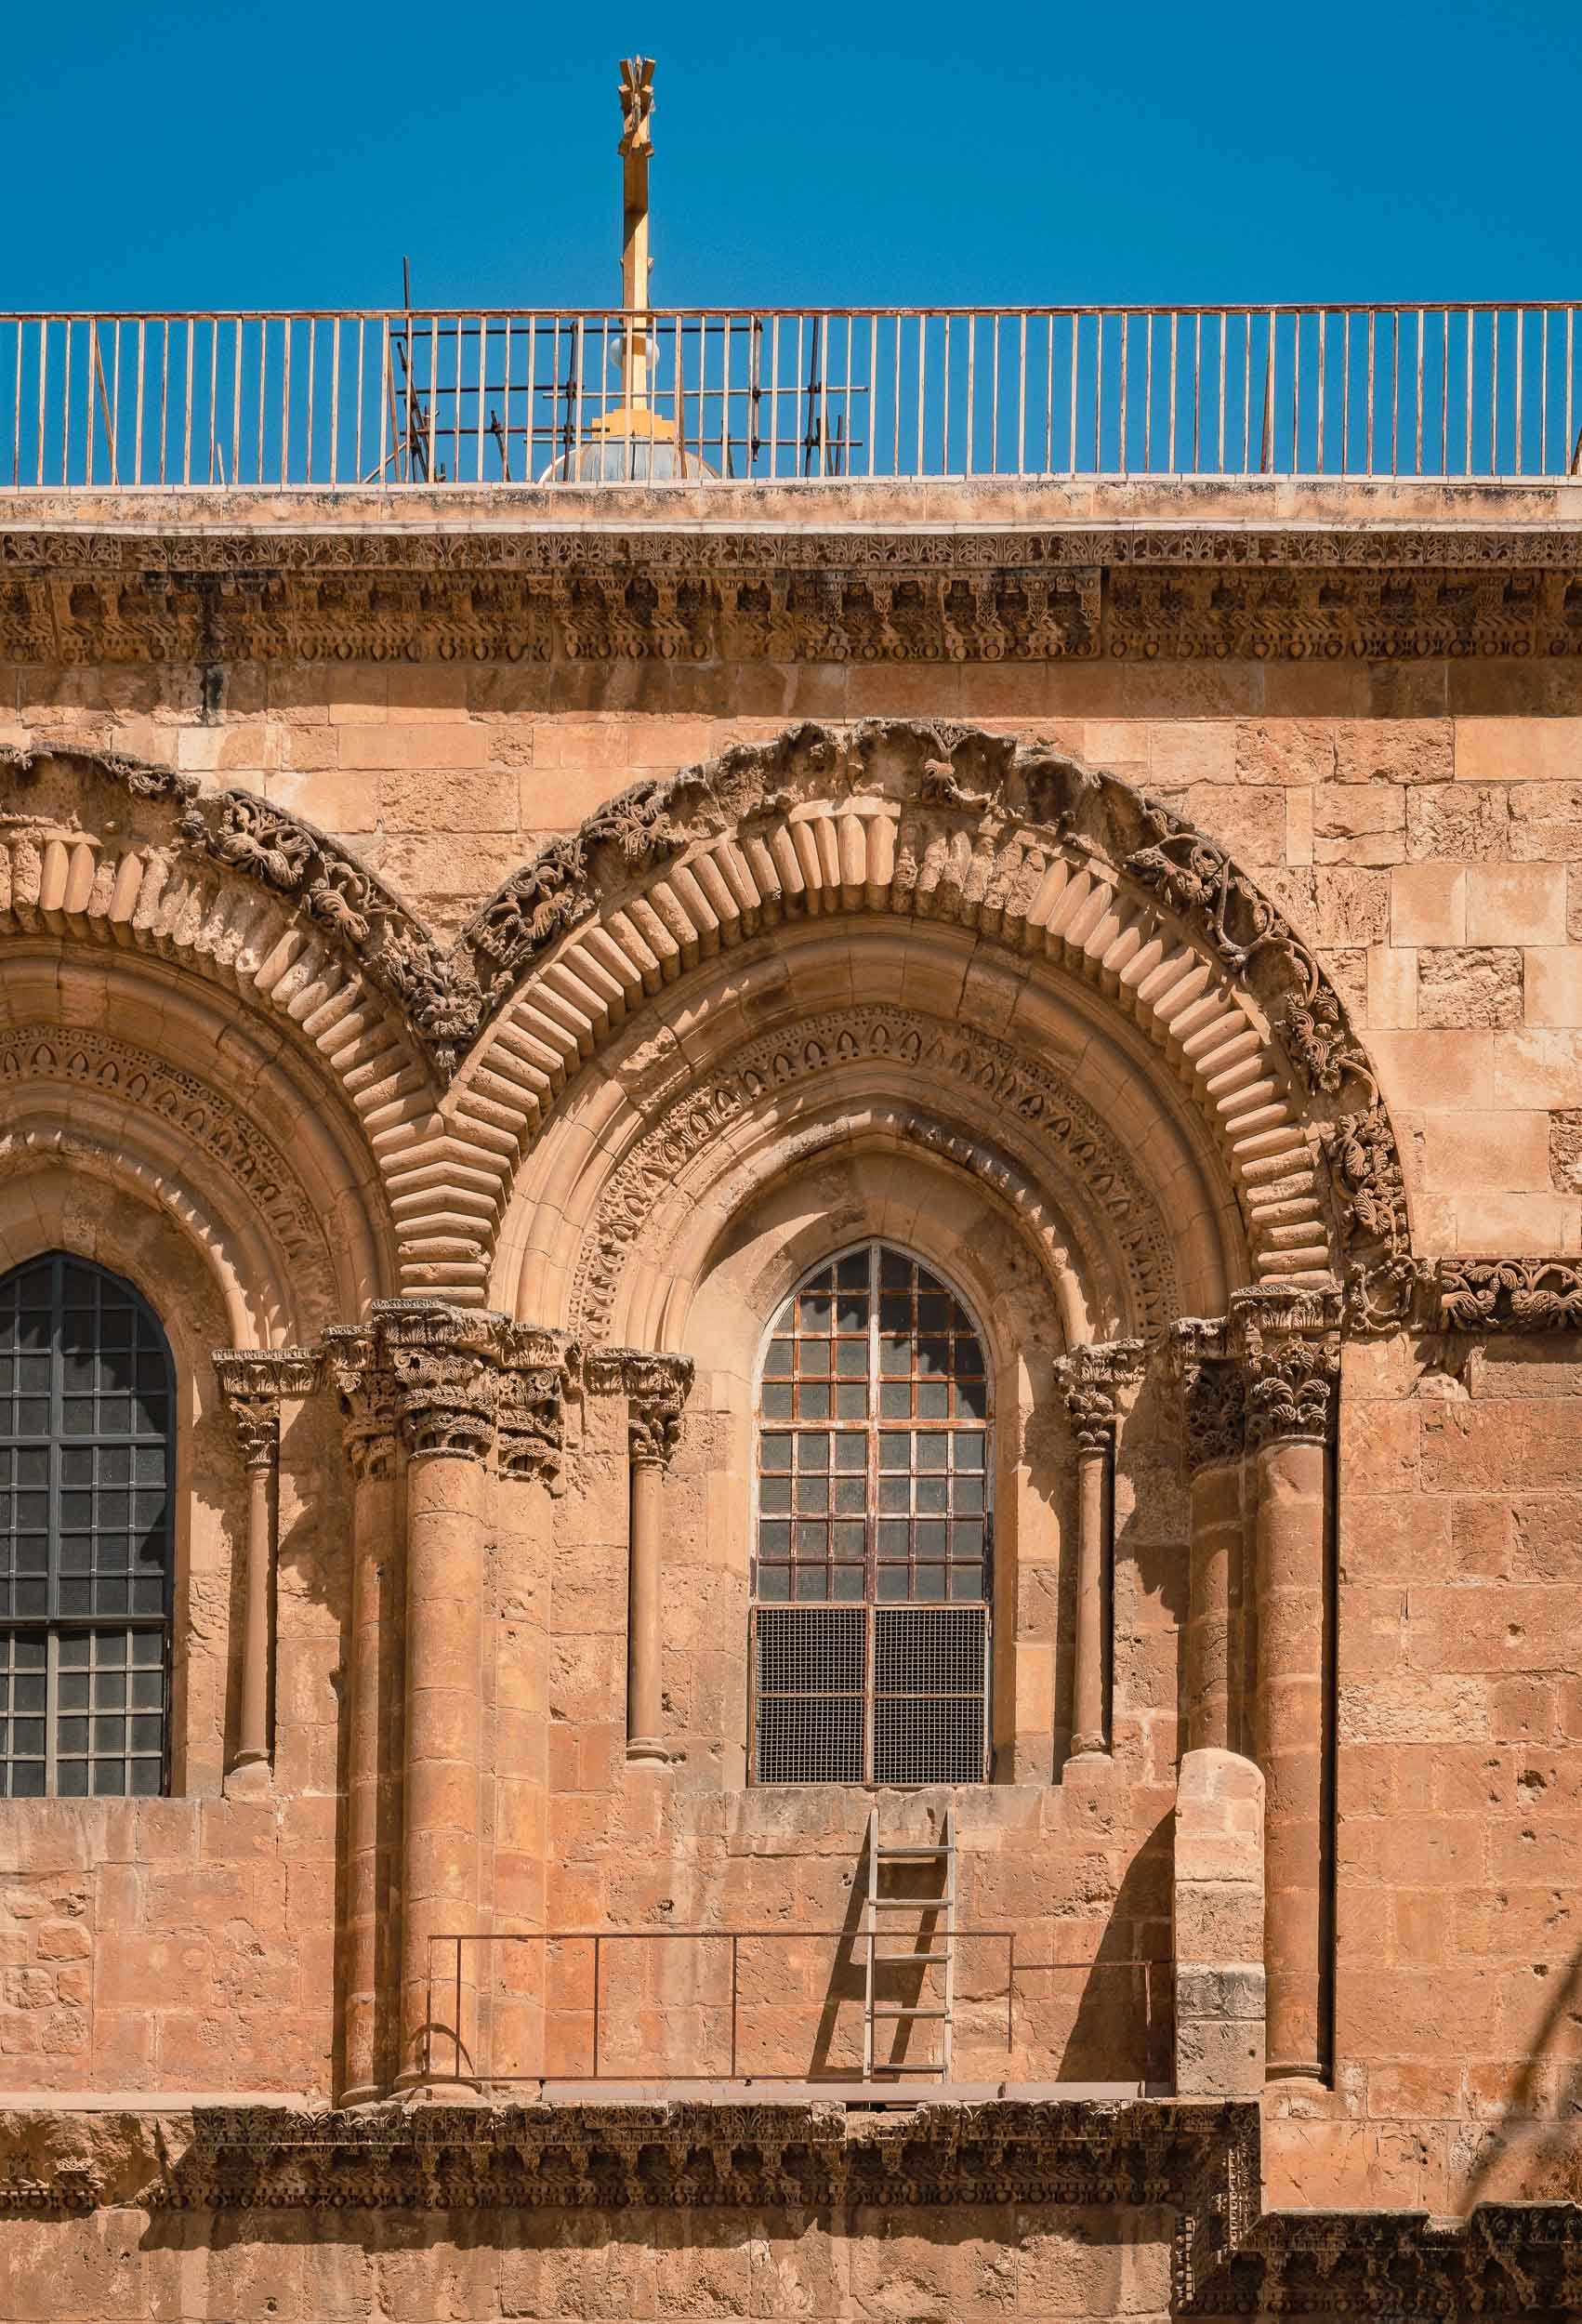  Nothing exemplifies this more than the  Immovable Ladder  on the exterior wall of the Church of the Holy Sepulchre, in place since 1728 to represent the clause that none of the six Christian churches may alter any of the physical aspects of the chur